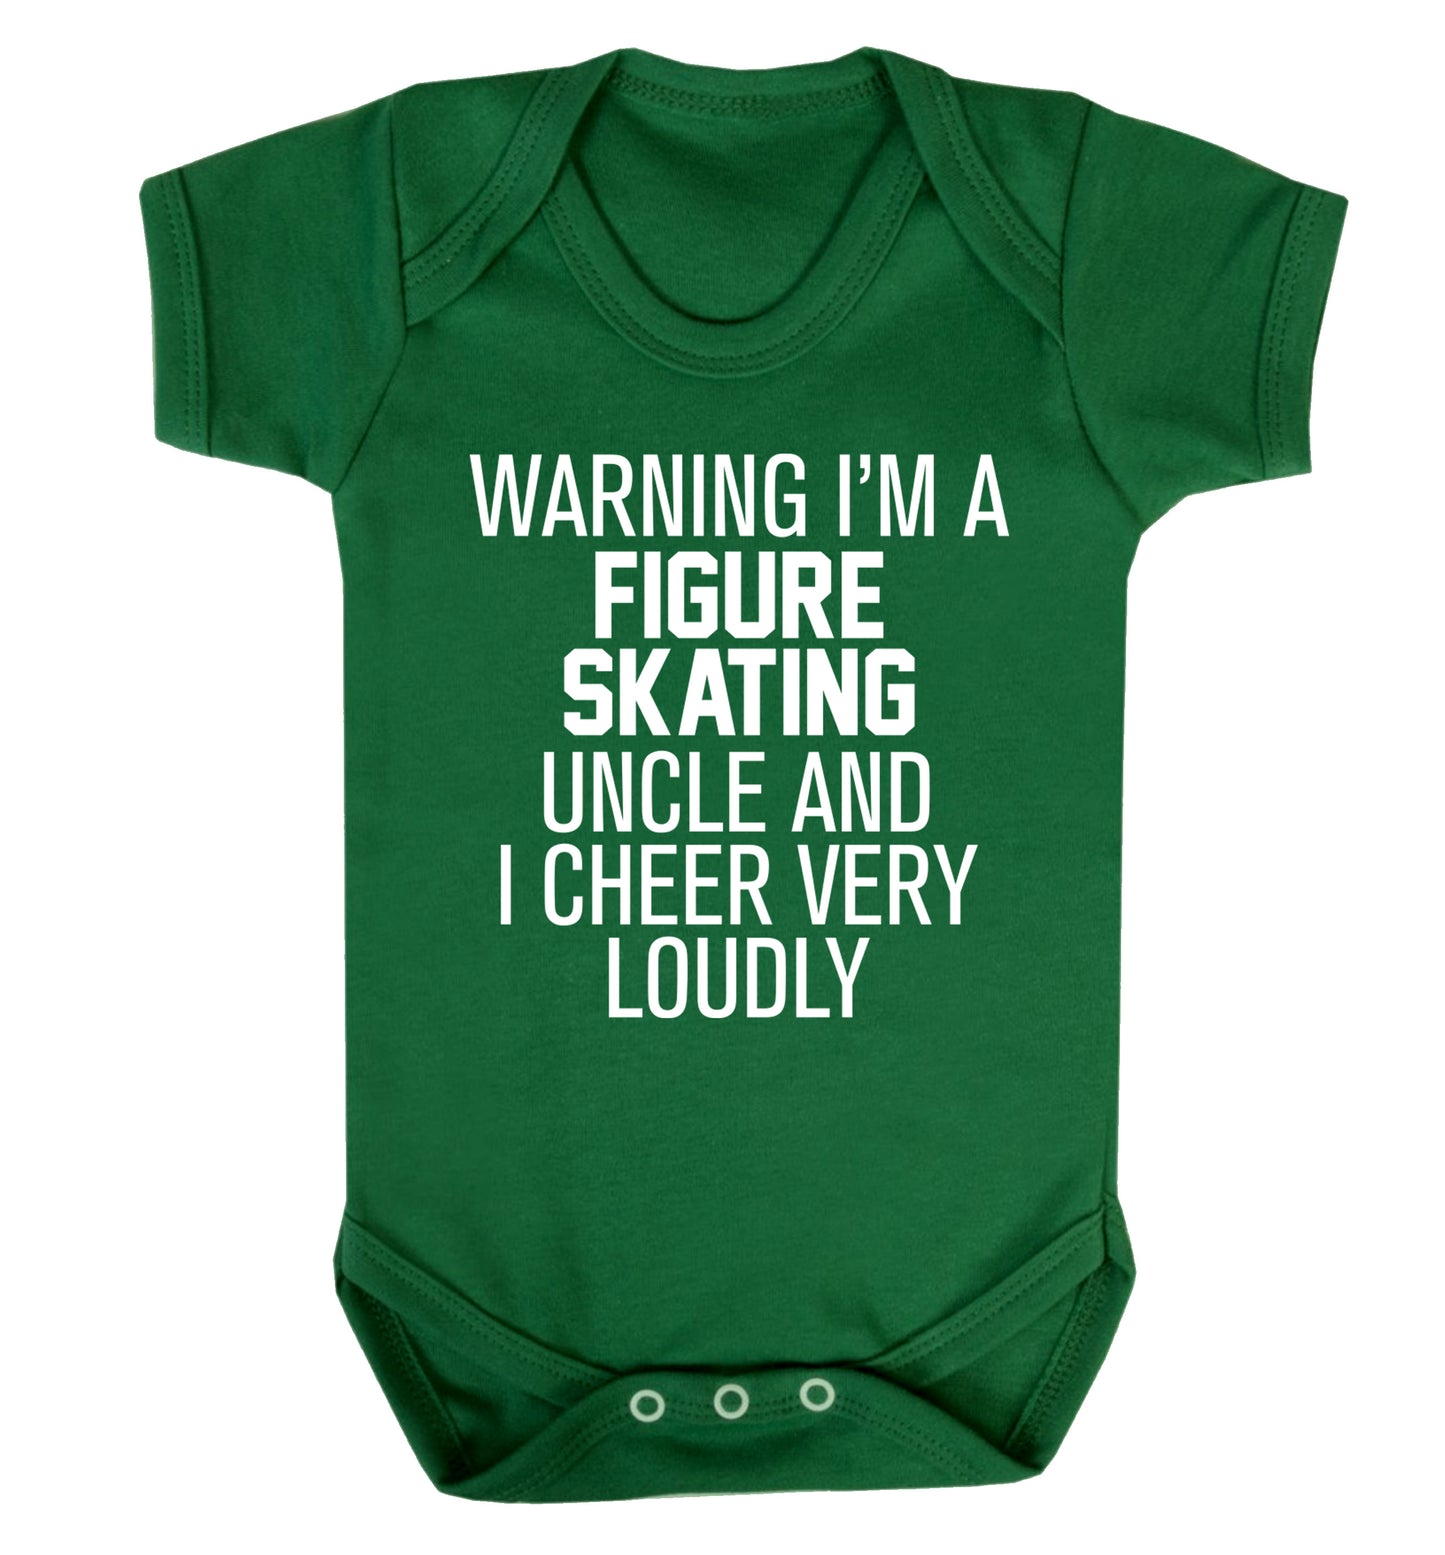 Warning I'm a figure skating uncle and I cheer very loudly Baby Vest green 18-24 months